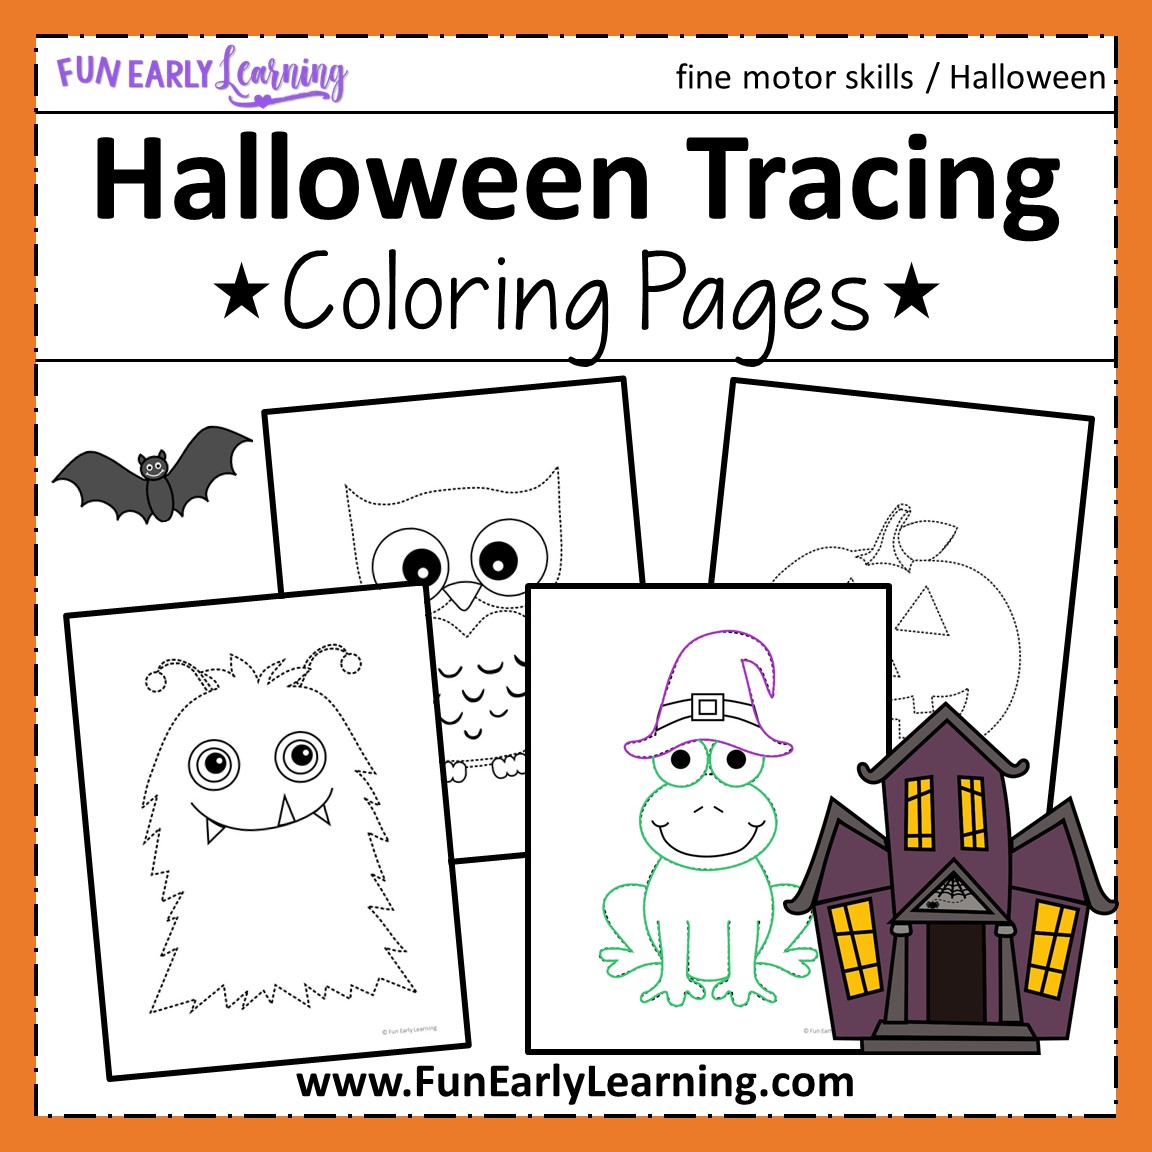 Printables - Free Coloring Pages & Learning worksheets